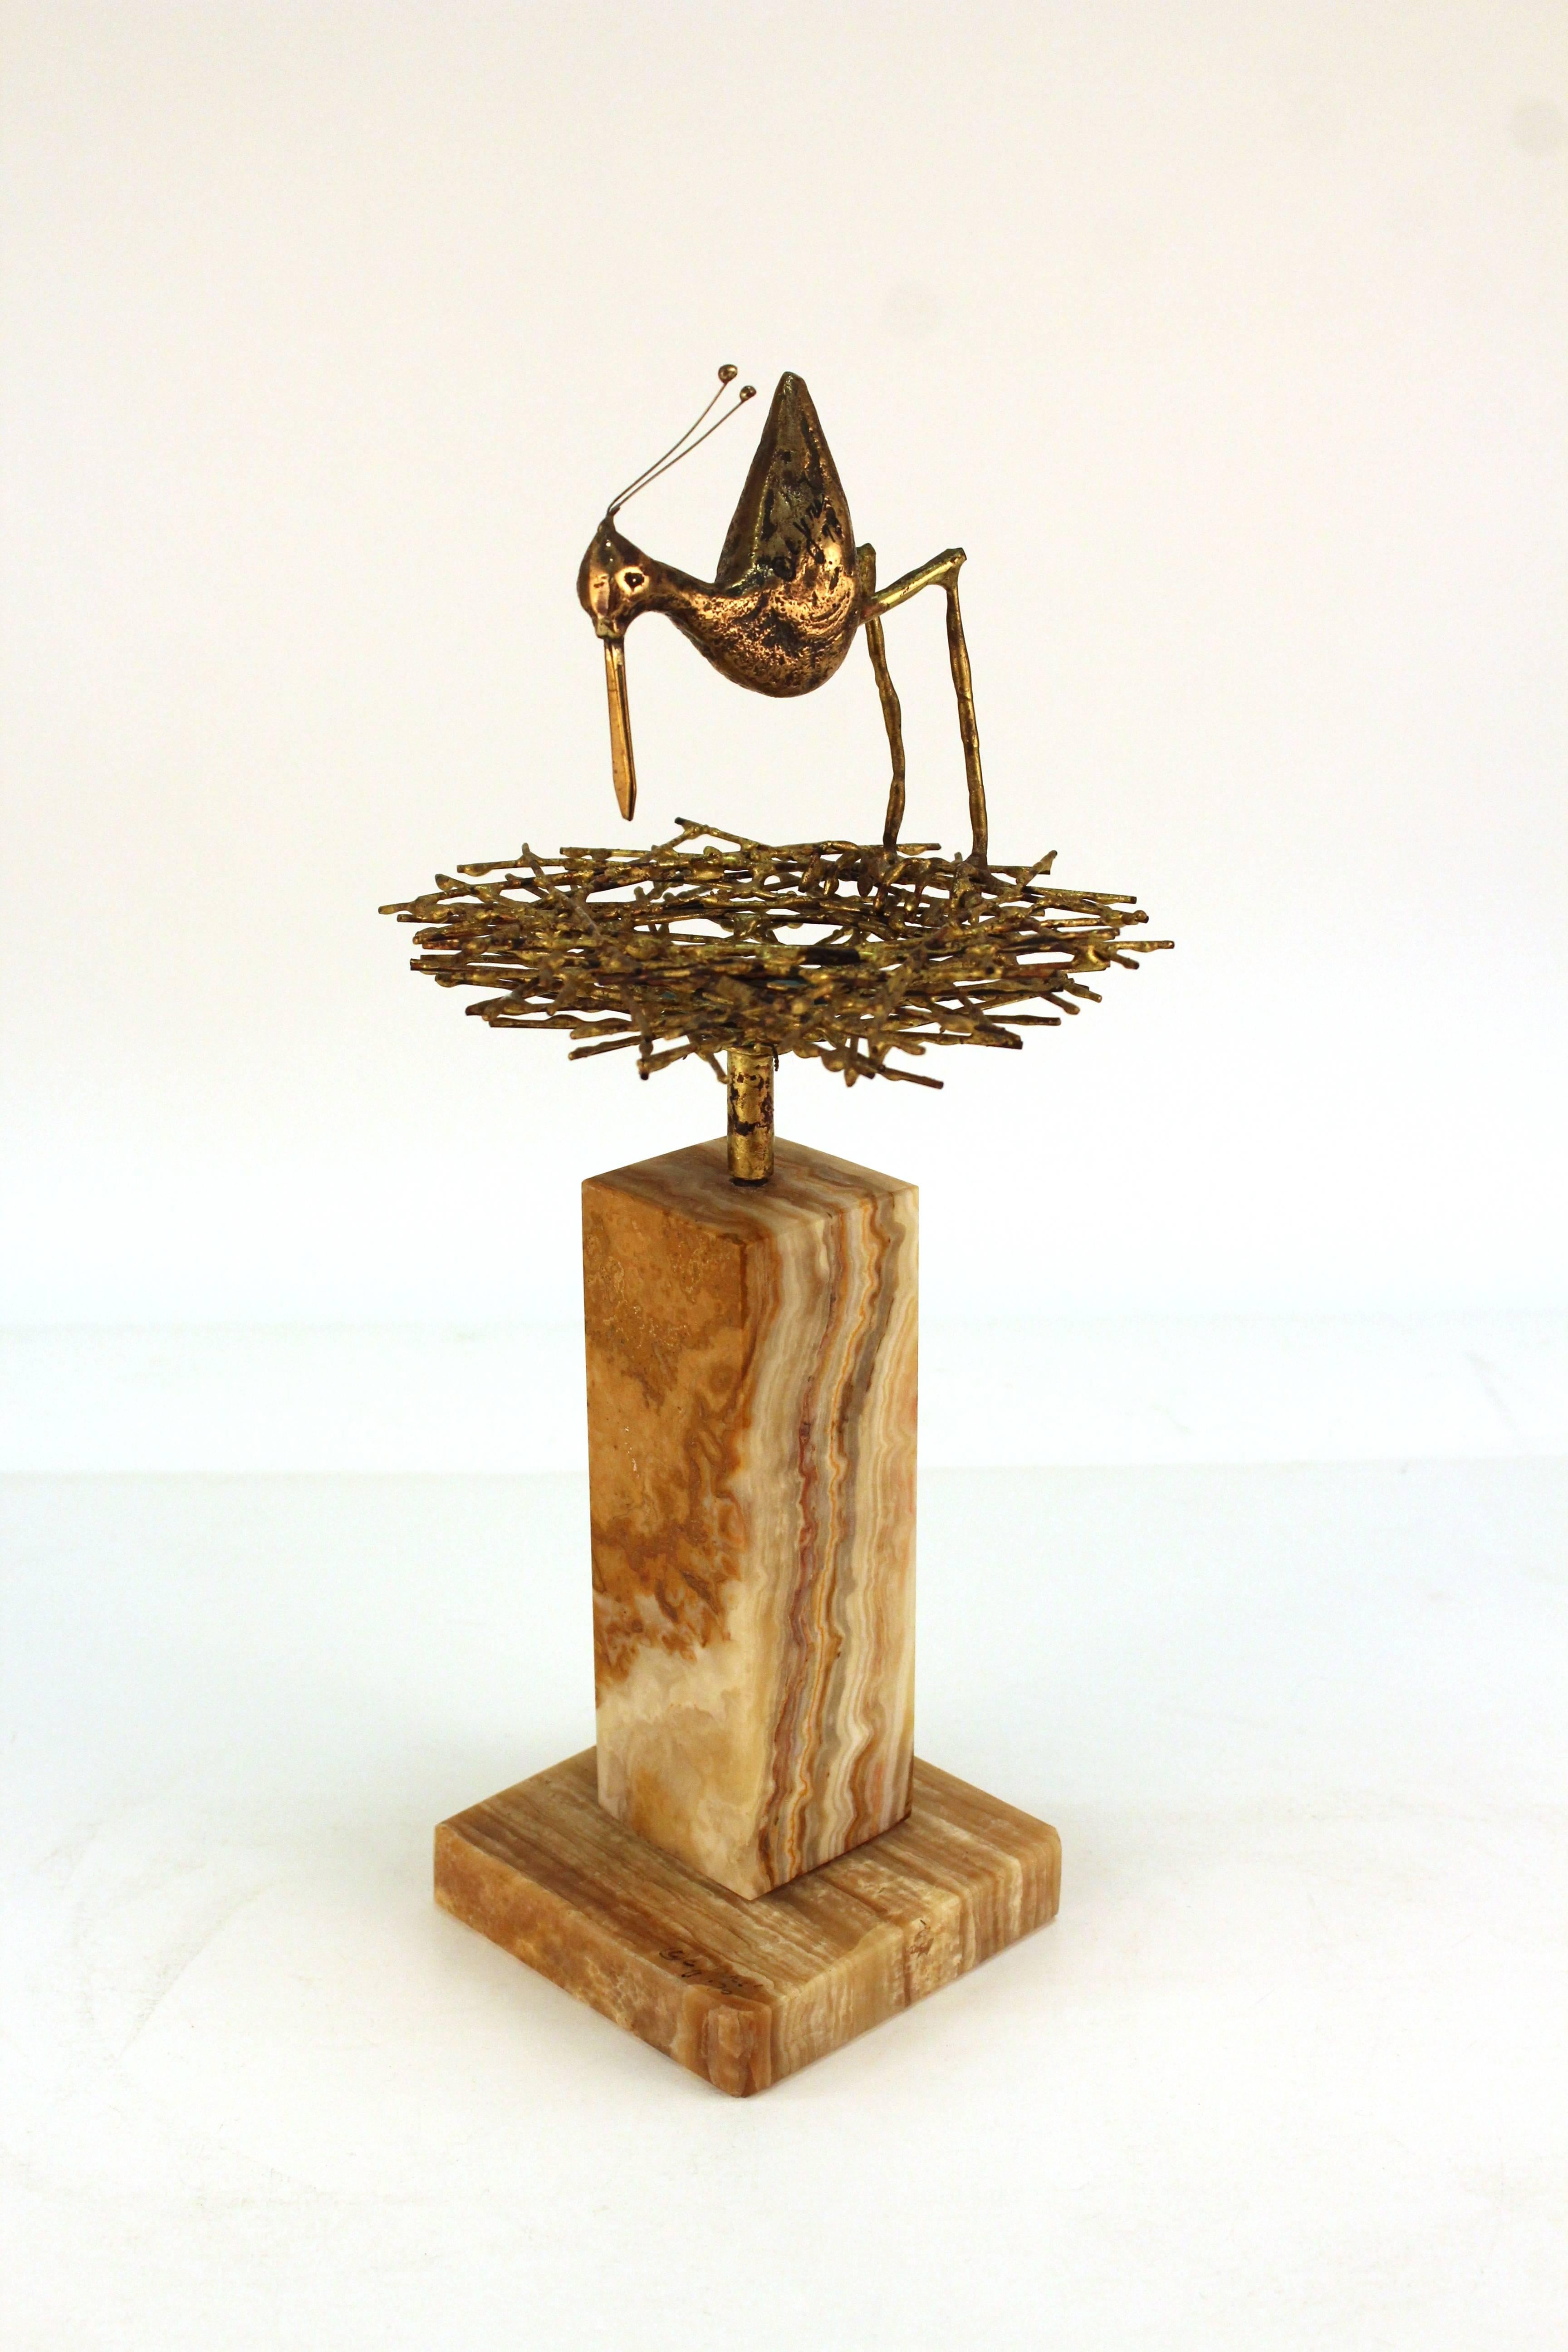 A Mid-Century Modern Curtis Jere sculpture of a sandpiper mother hovering over her nest with three blue eggs. Signed Curtis Jere on the marble base as well as on the body of the bird. In very good condition.